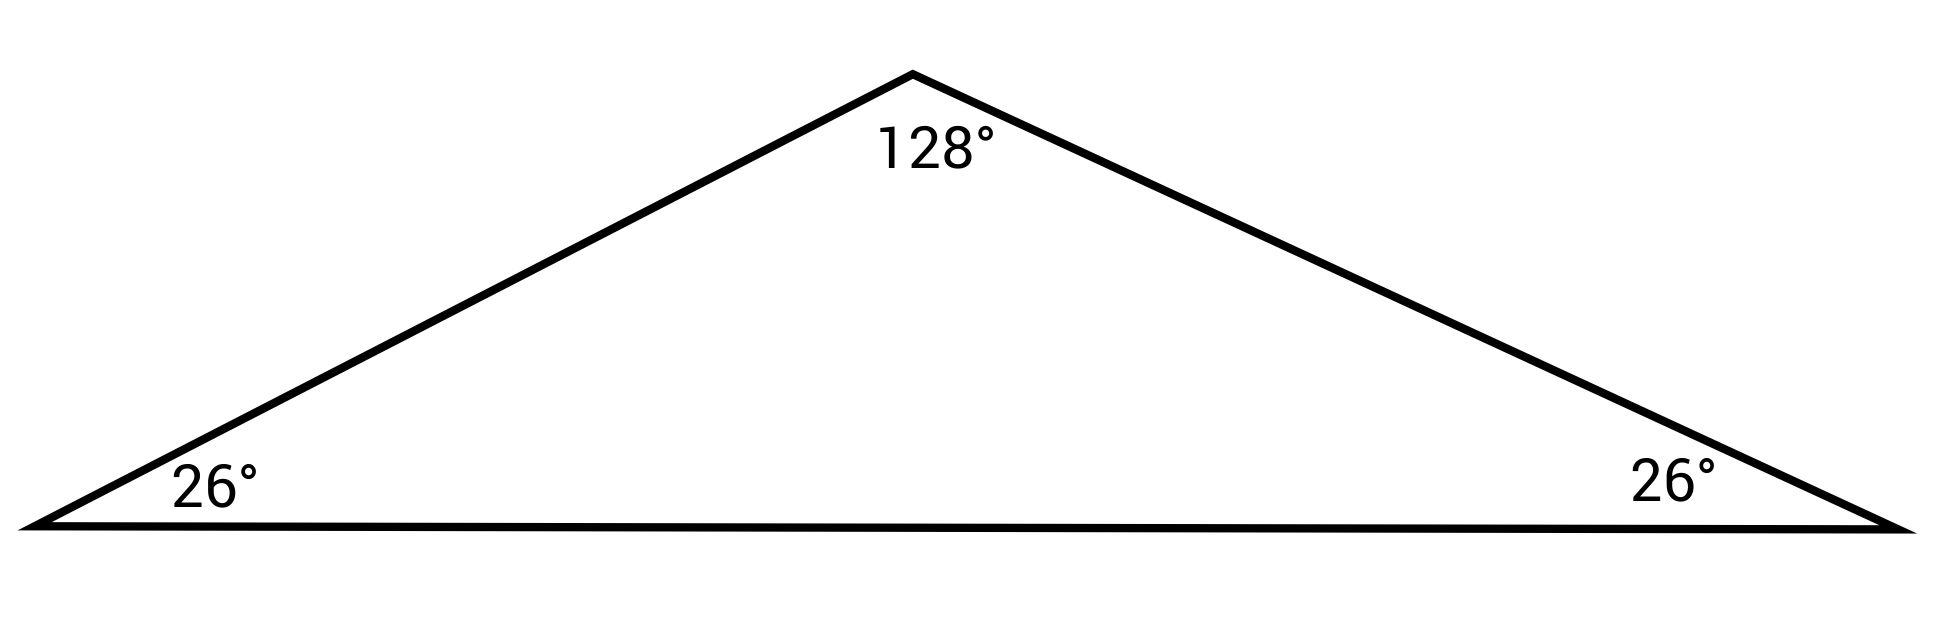 Triangle with angles 26, 128, and 26 degrees